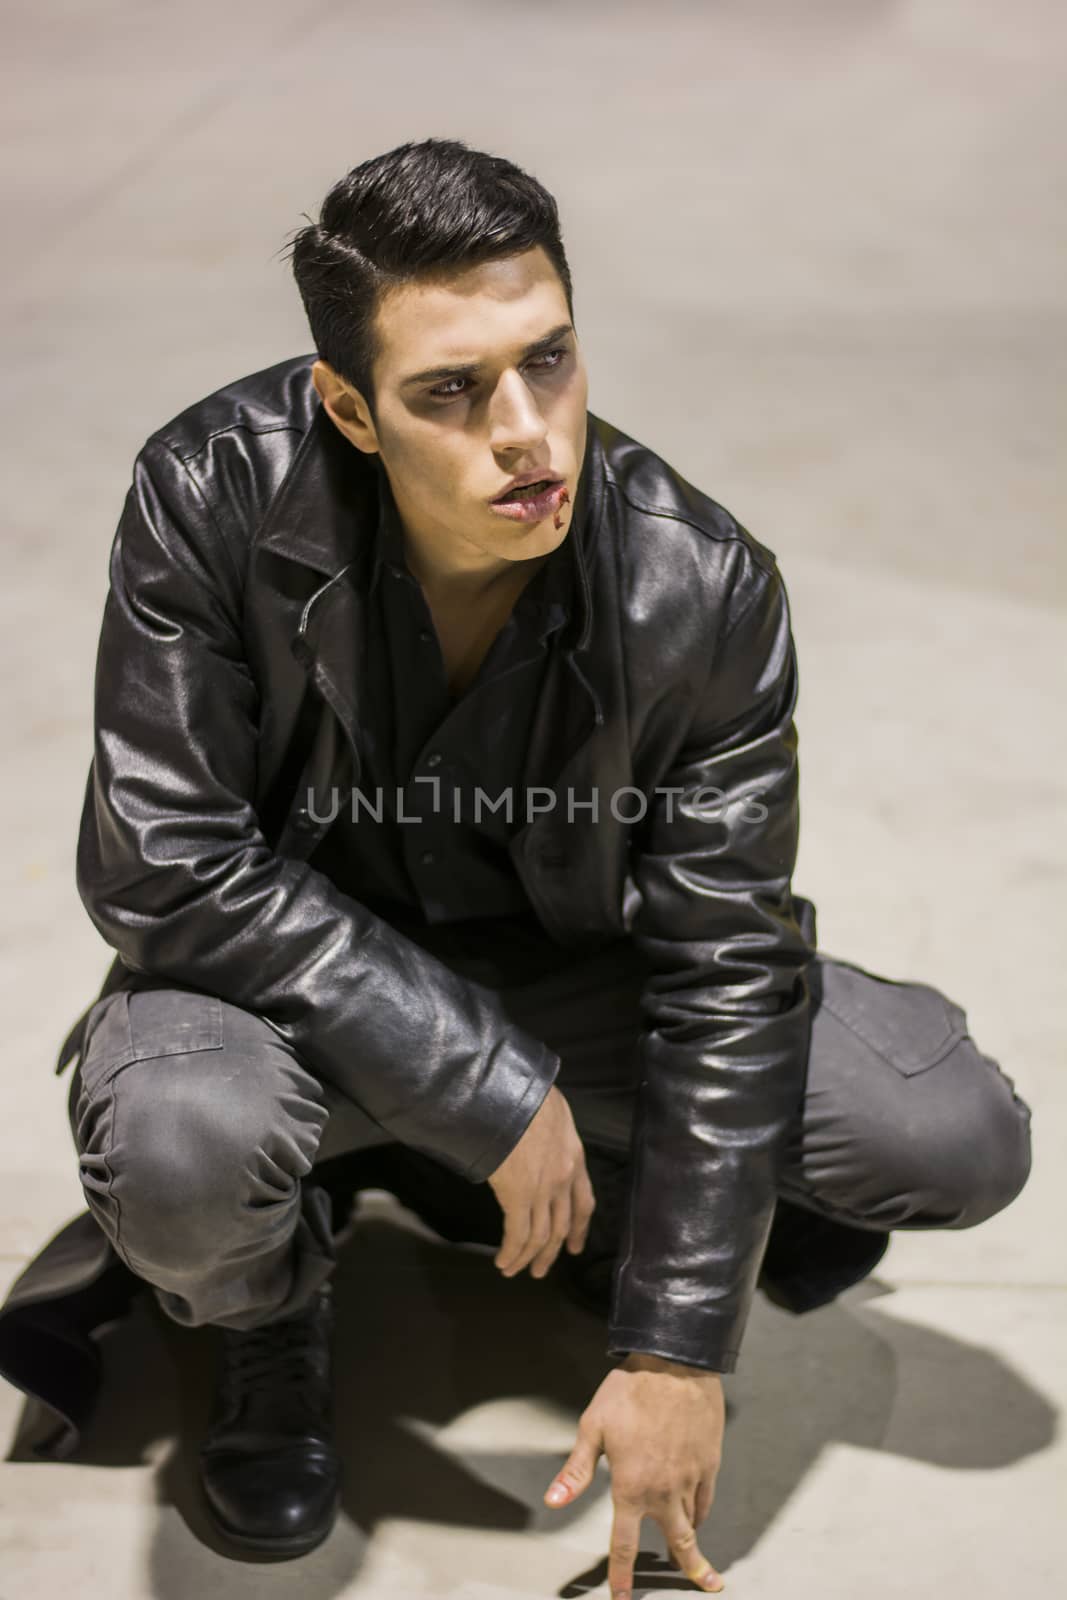 Young Vampire Man with Black Leather JacketPortrait of a Young Vampire Man with Black Leather Jacket Sitting on Floor